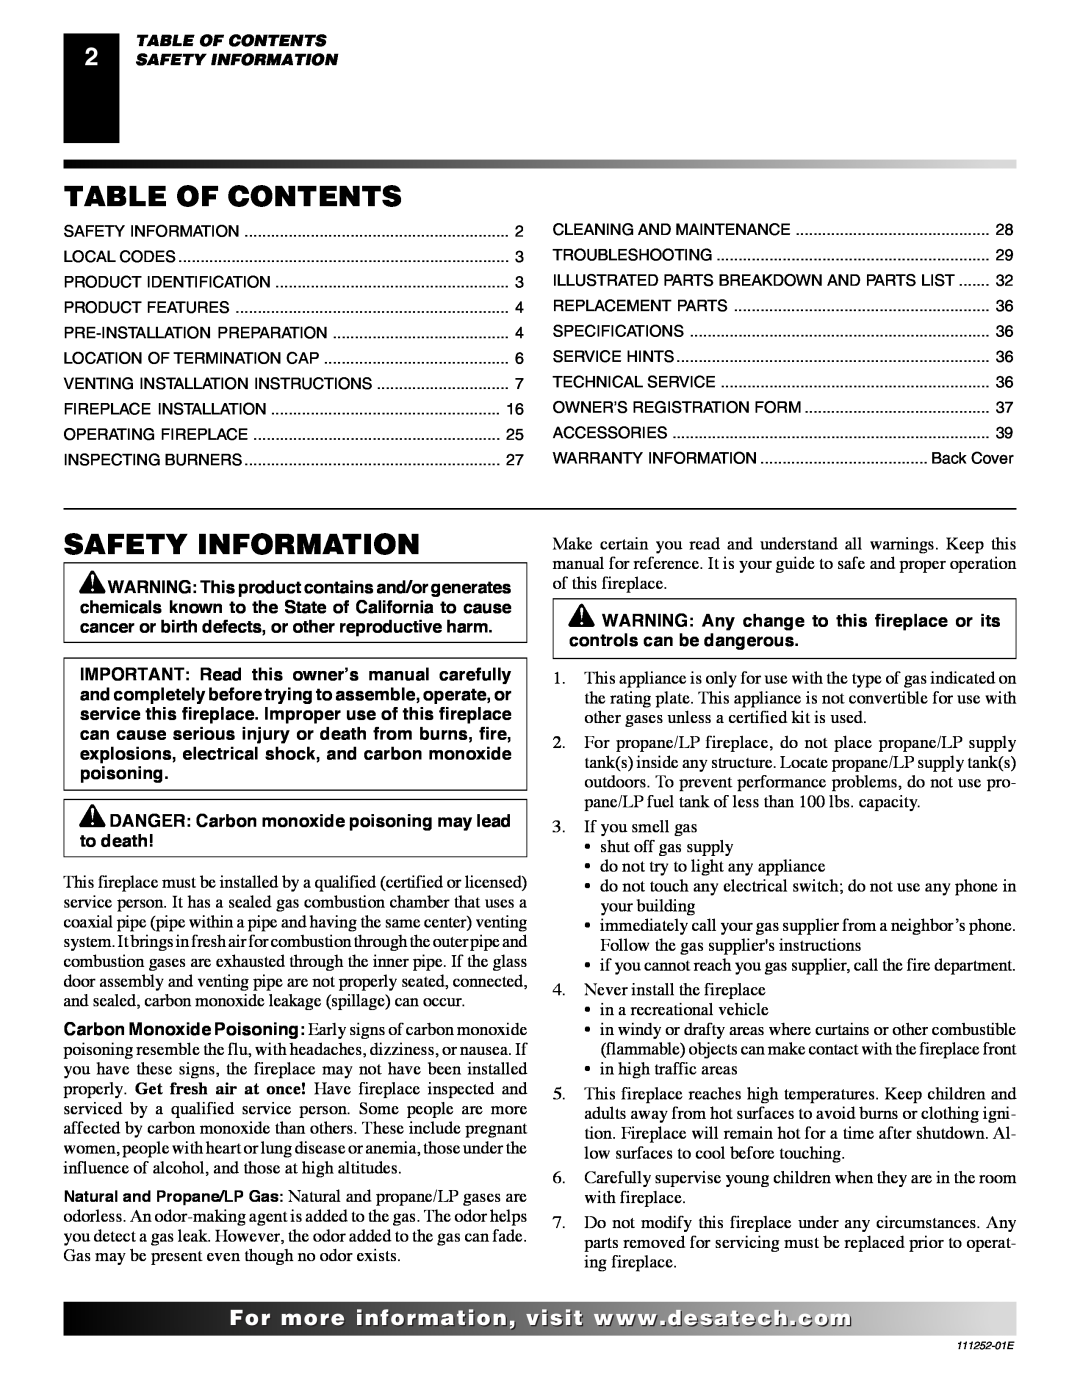 Desa (V)V36N-B SERIES, VV36NC1 SERIES, CHDV36NR-C, (V)V36P-B SERIES, VV36PC1 SERIES Table Of Contents, Safety Information 